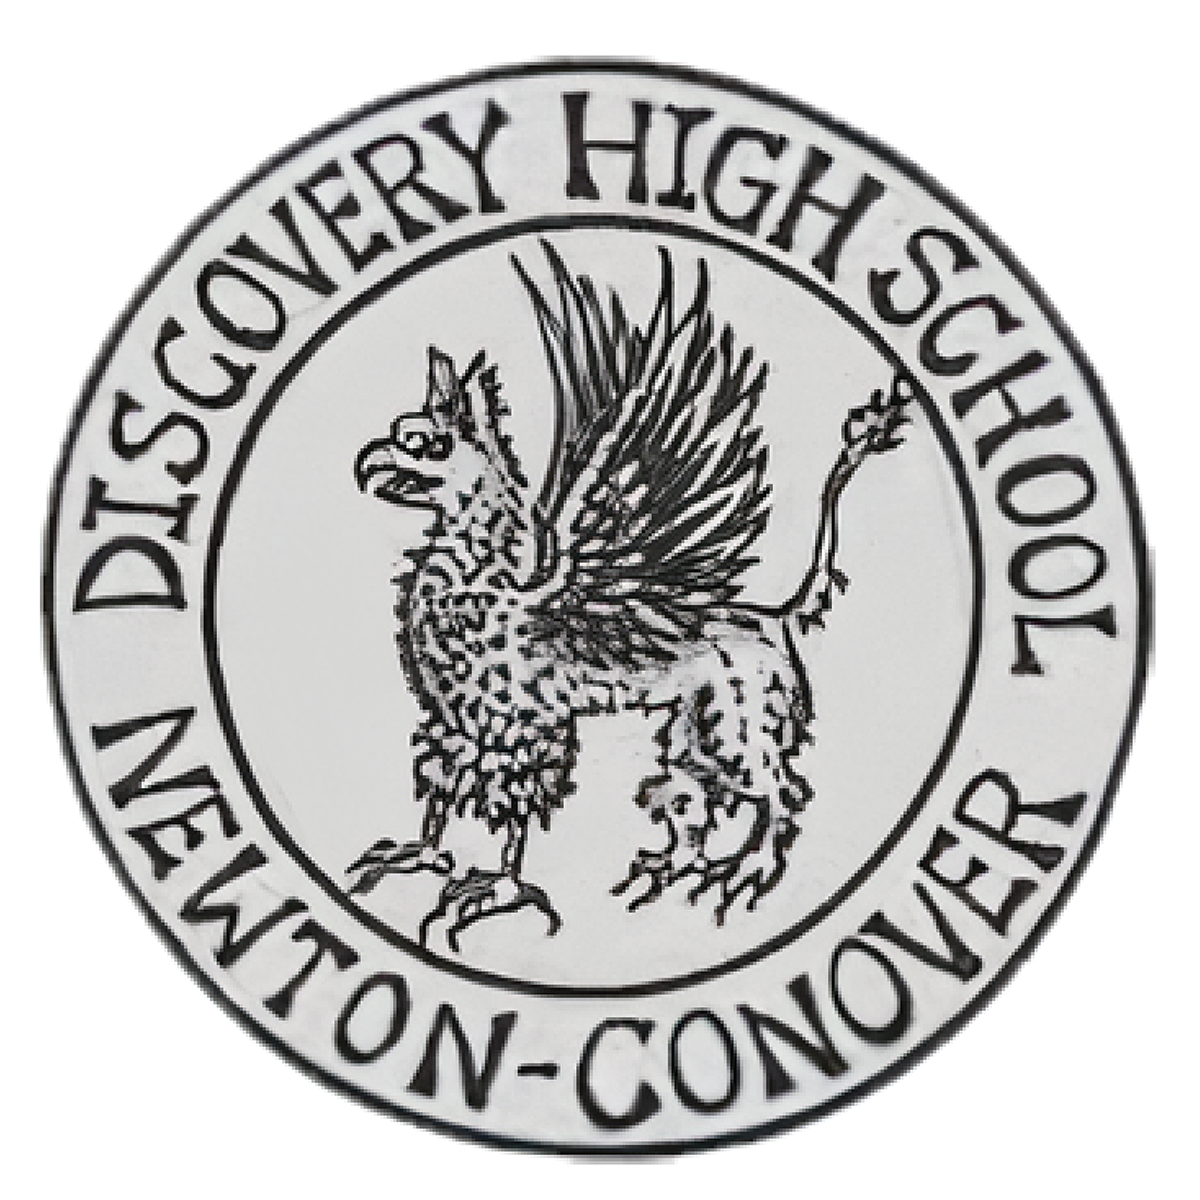 Discovery High School